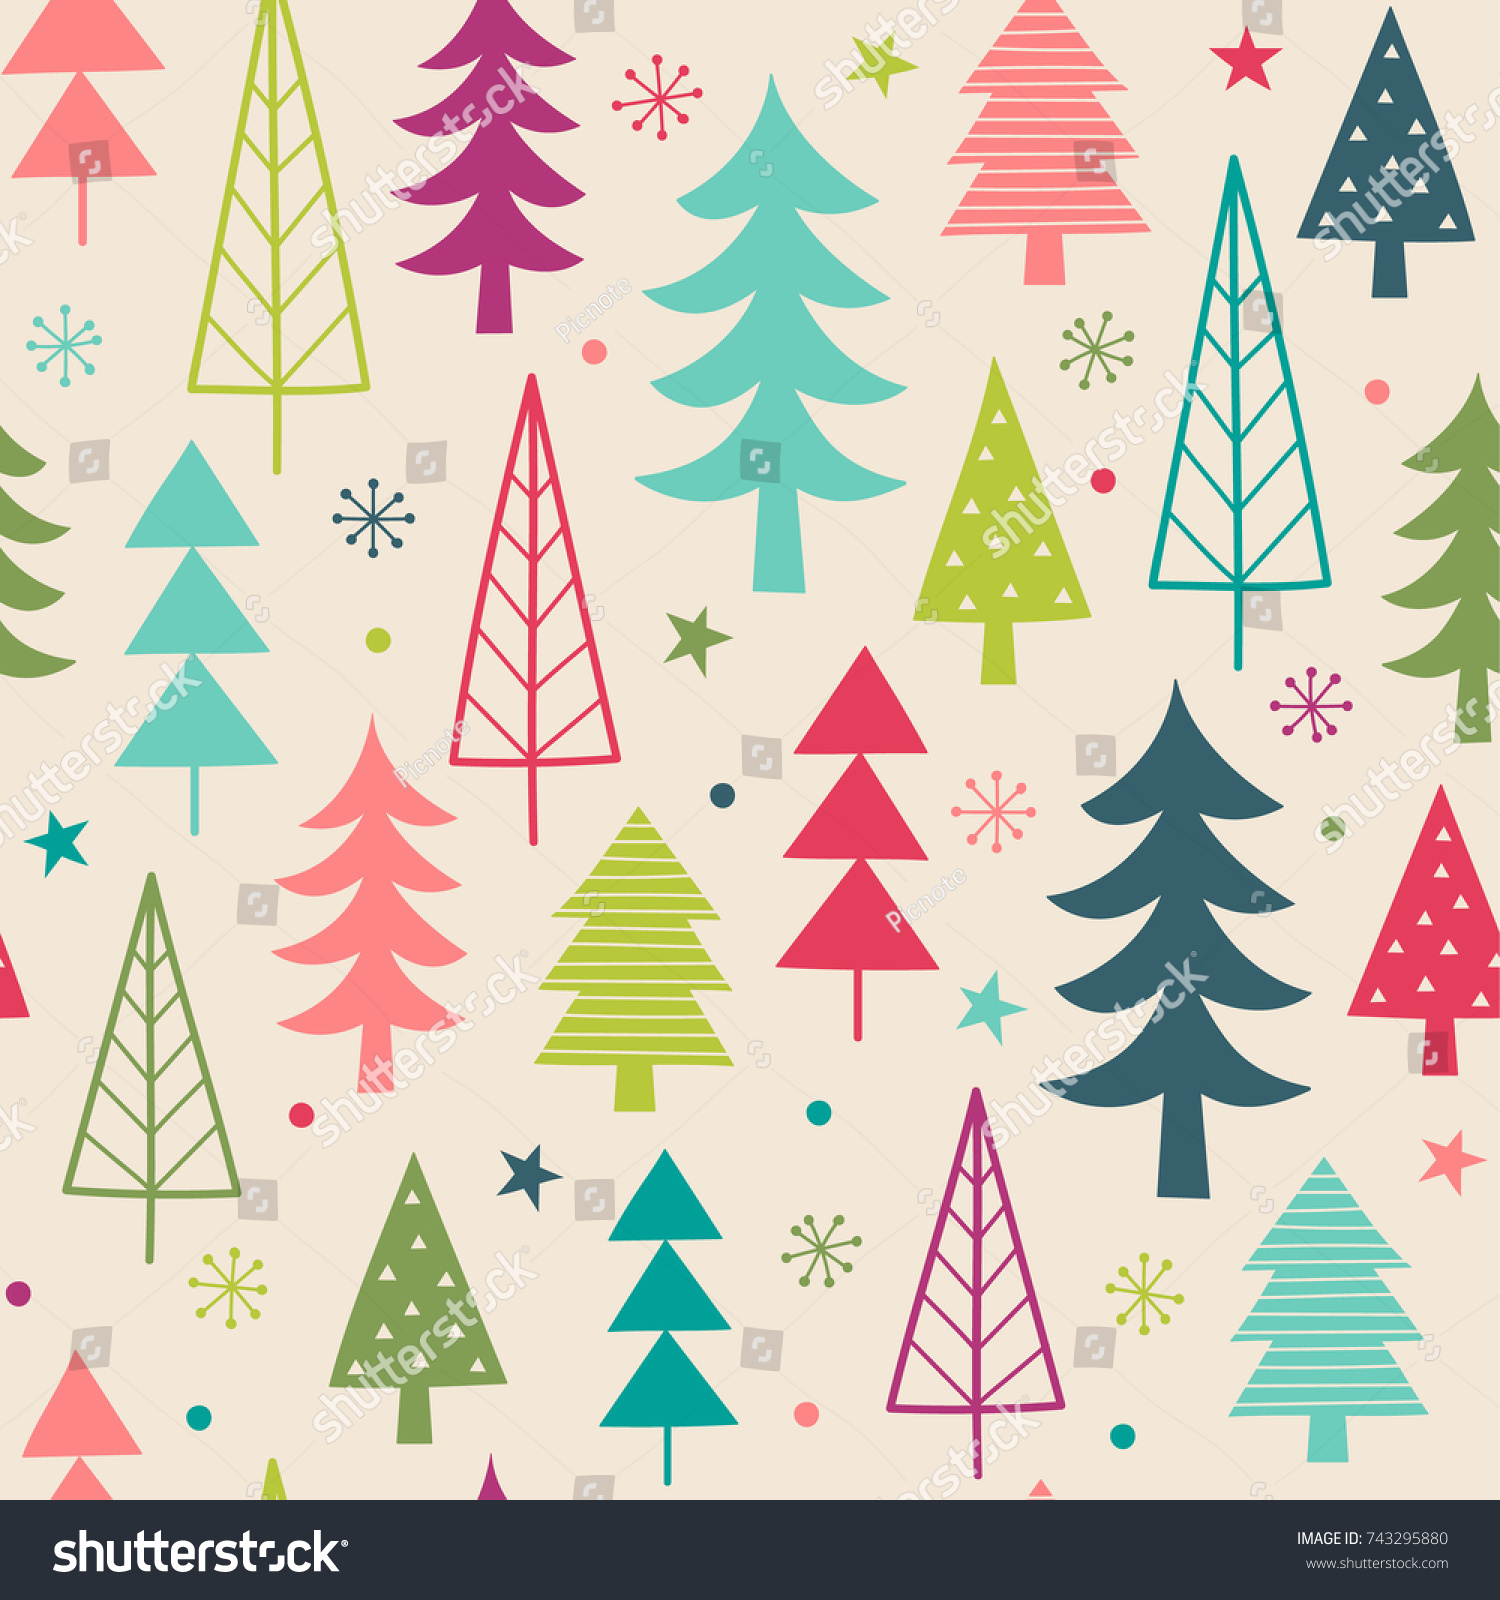 Colorful Christmas Trees Seamless Pattern Background Stock Vector ...